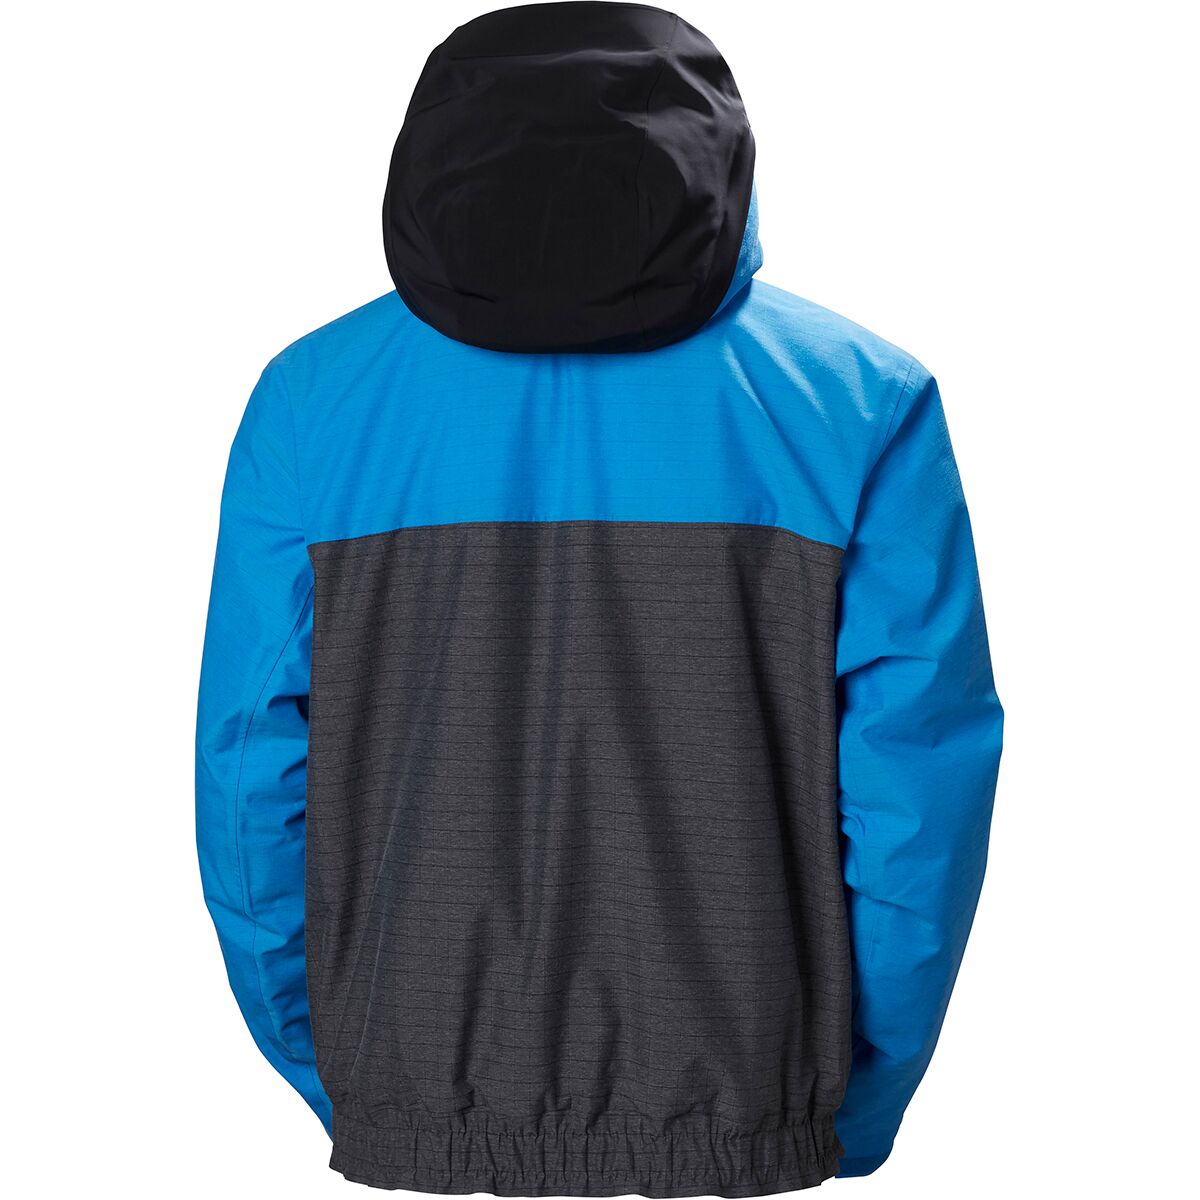 Helly Hansen Tricolore Insulated Jacket - Women's - Clothing